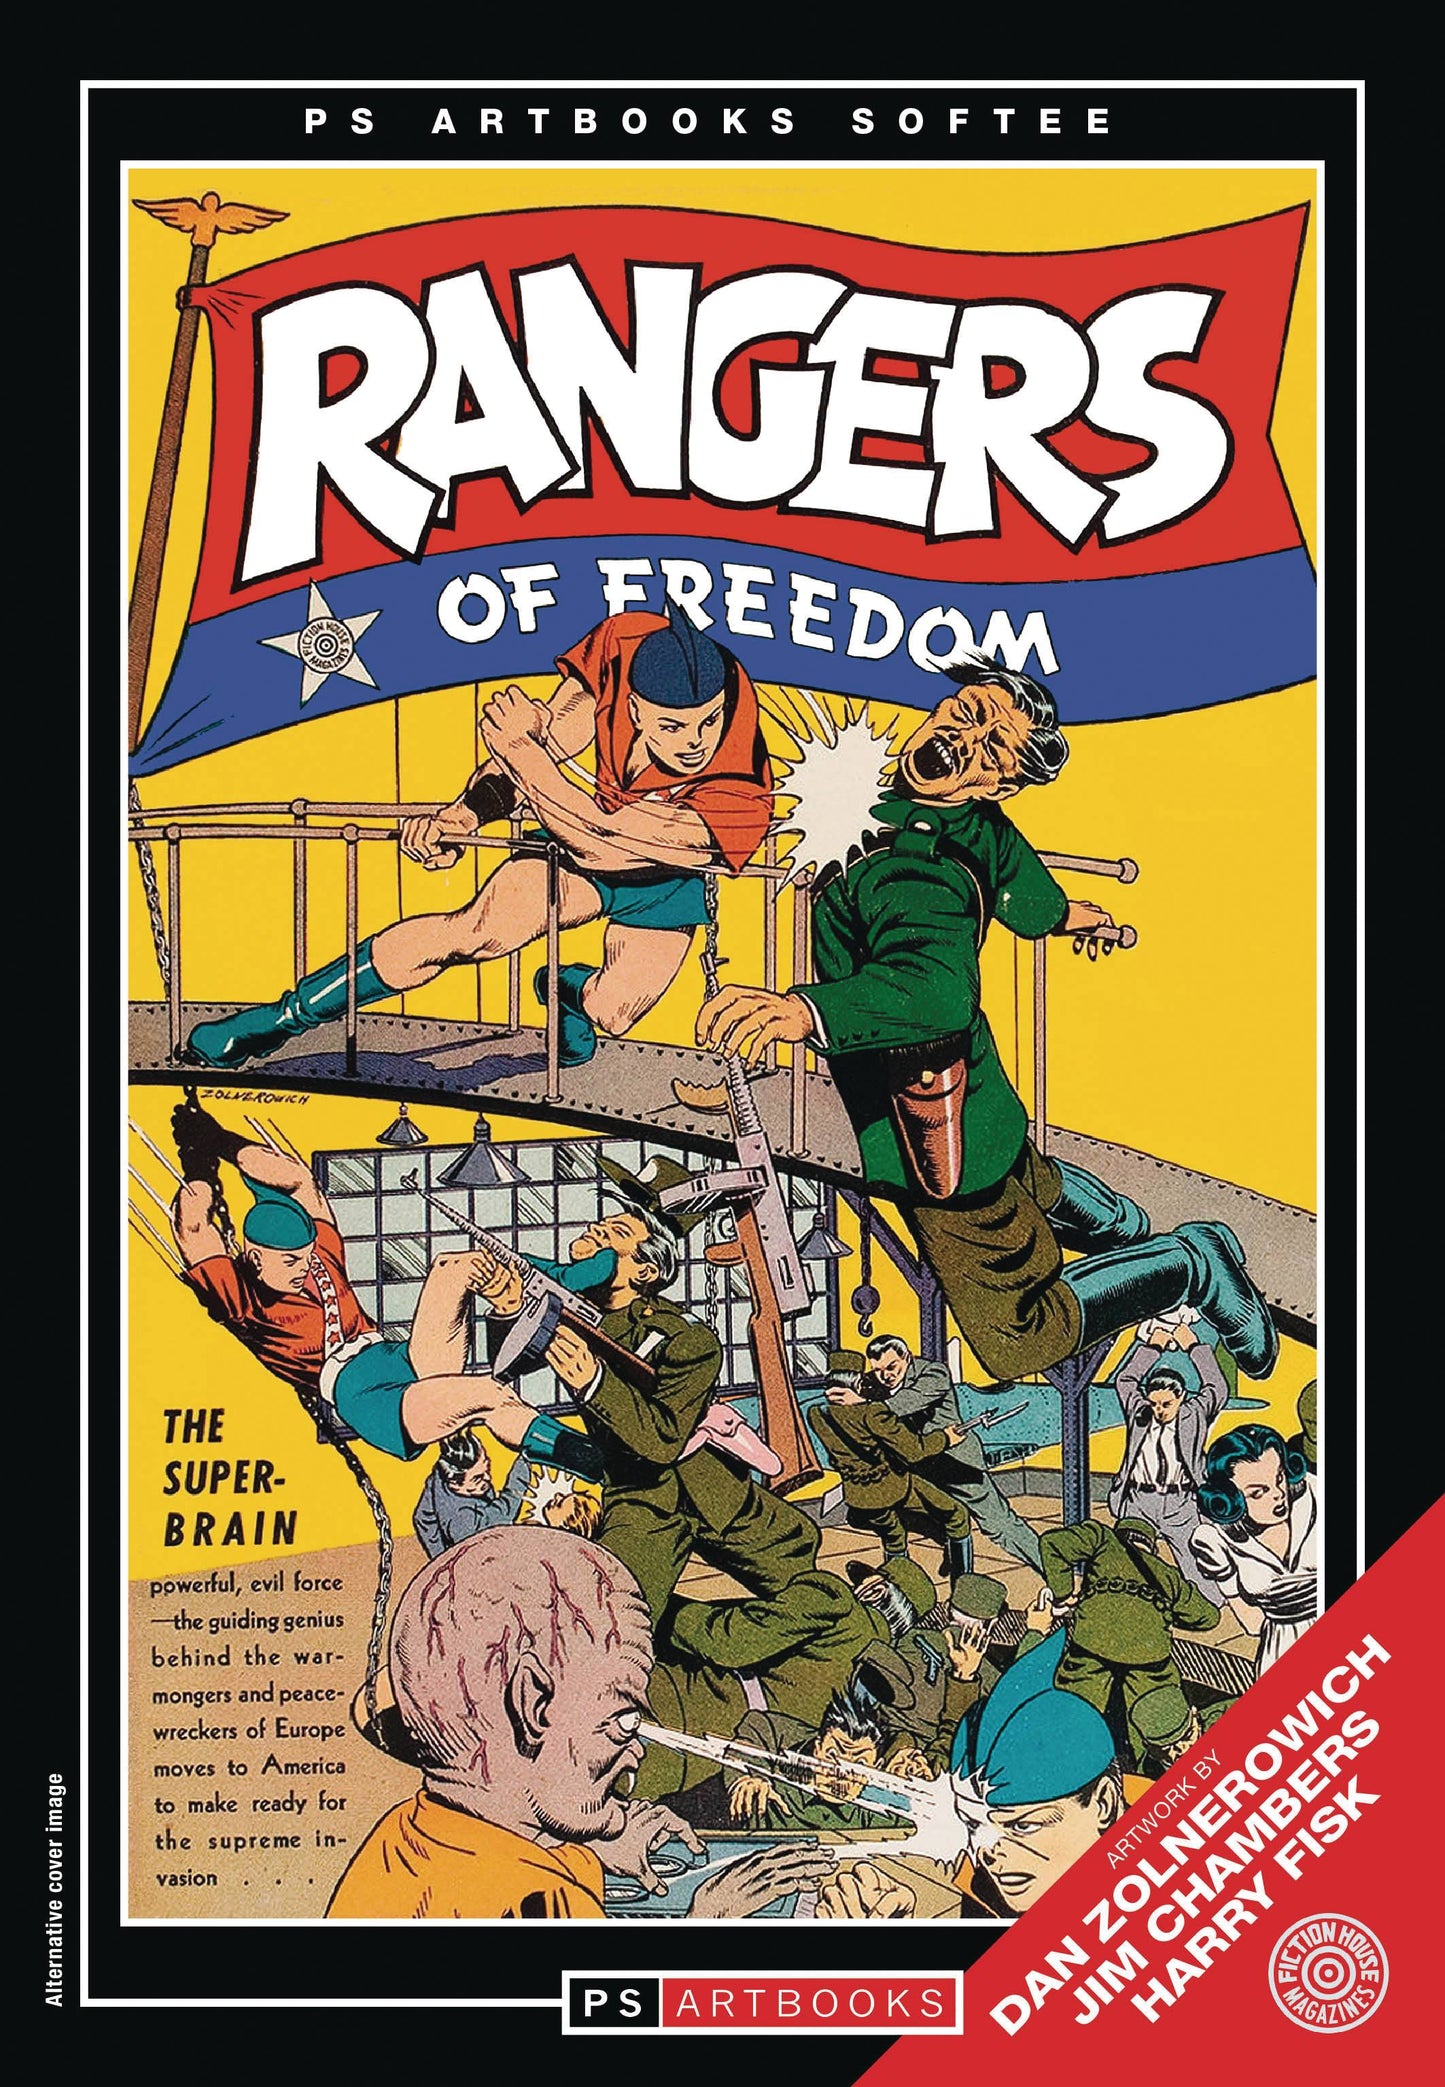 The One Stop Shop Comics & Games Golden Age Classics Rangers Of Freedom Softee (C: 0-1-1) (3/29/2023) PS ARTBOOKS